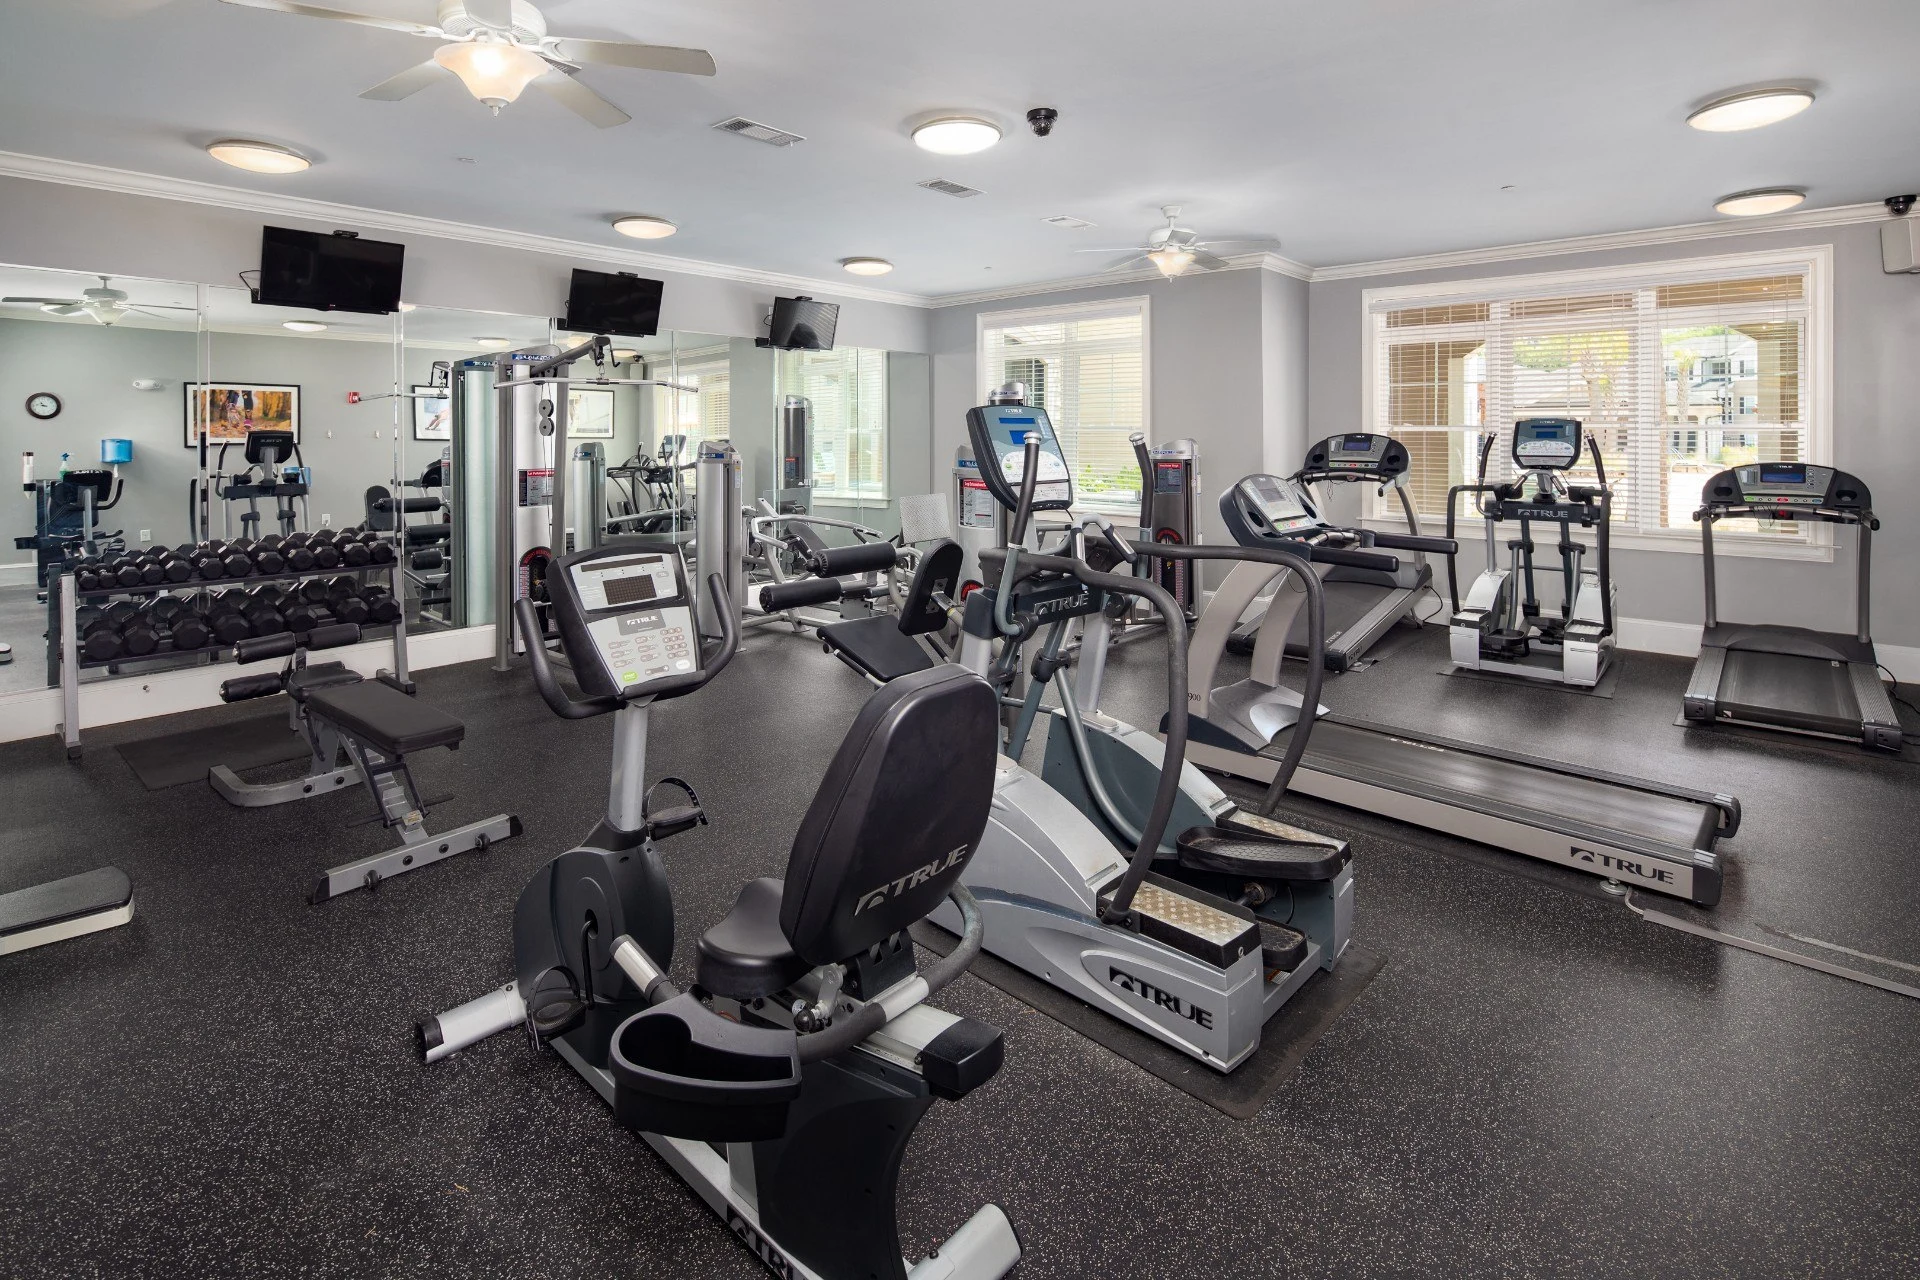 Fitness center with wall length mirror, cardio and weight lifting equipment